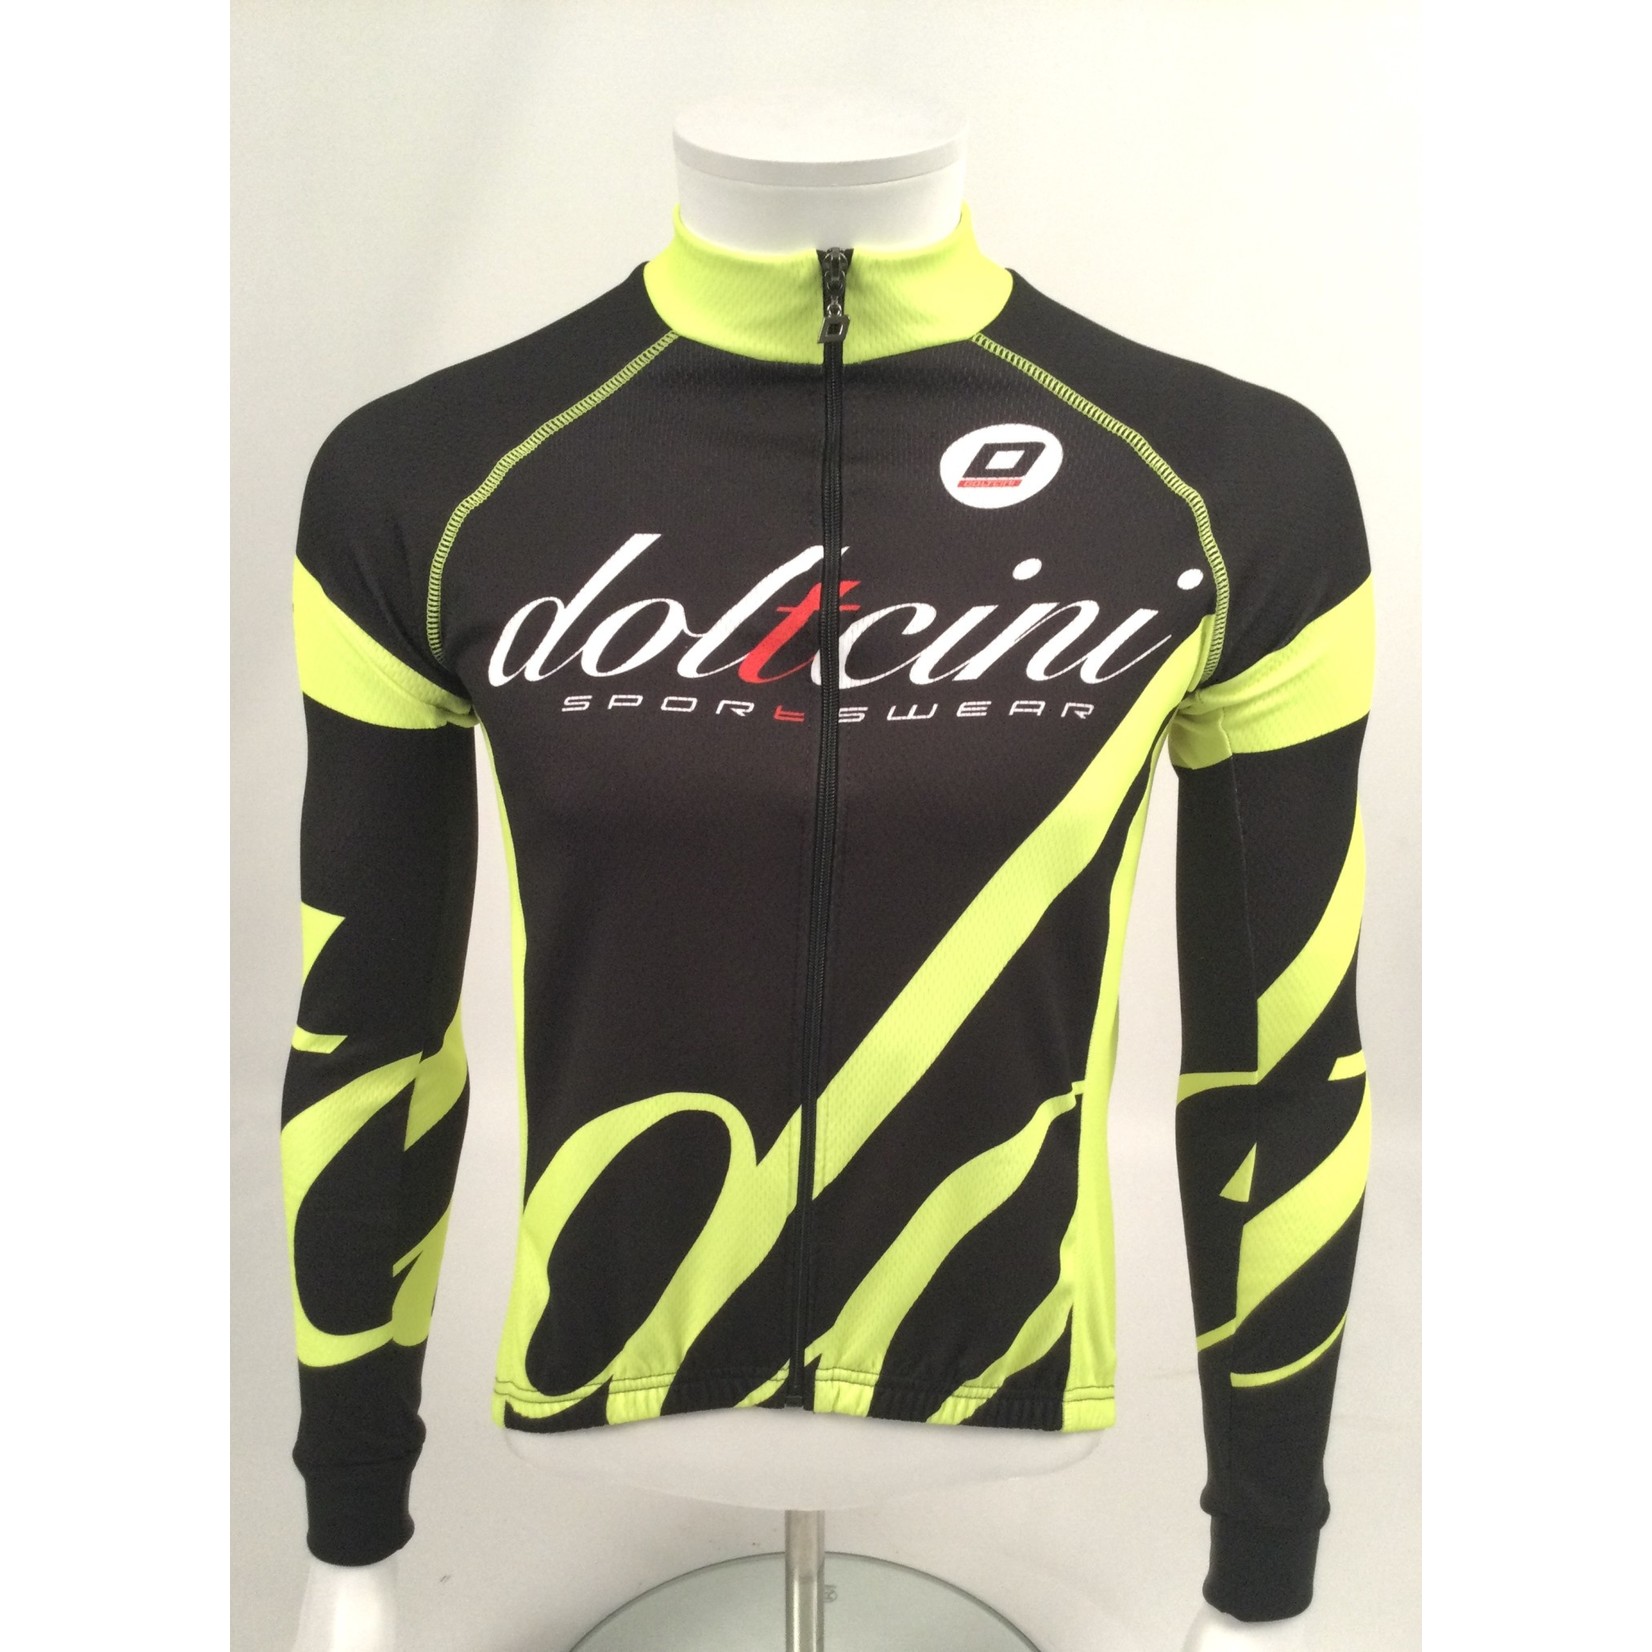 Doltcini Doltcini Bianca Fluo Ladies Long Sleeved Jersey Classic Large